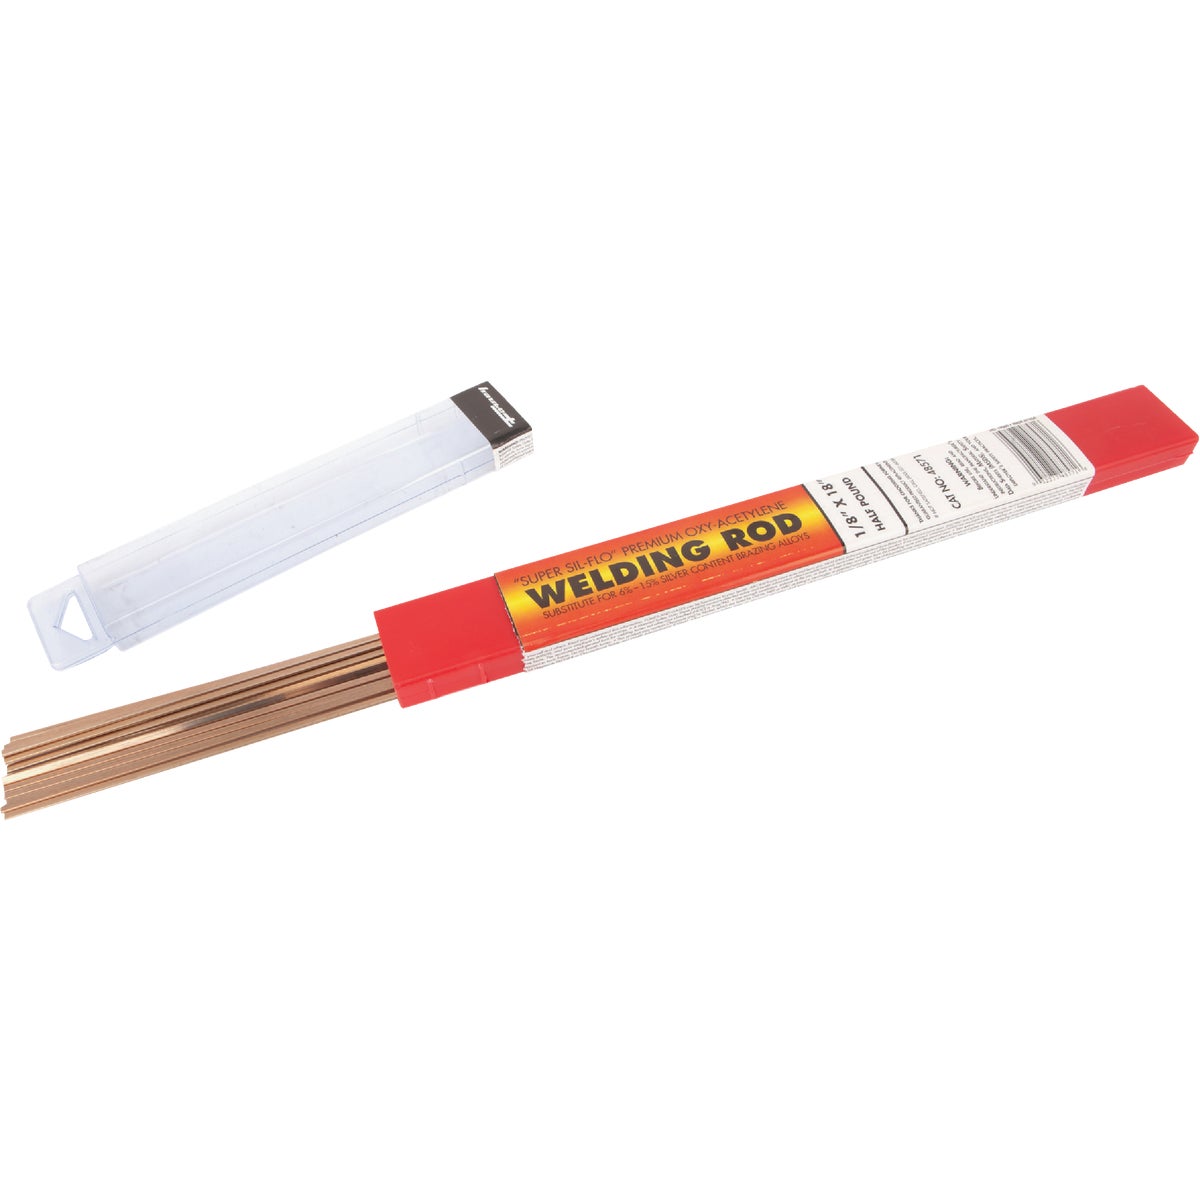 Forney 1/8 In. x 18 In. Super Sil-Flo Brazing Rod, 1/2 Lb.